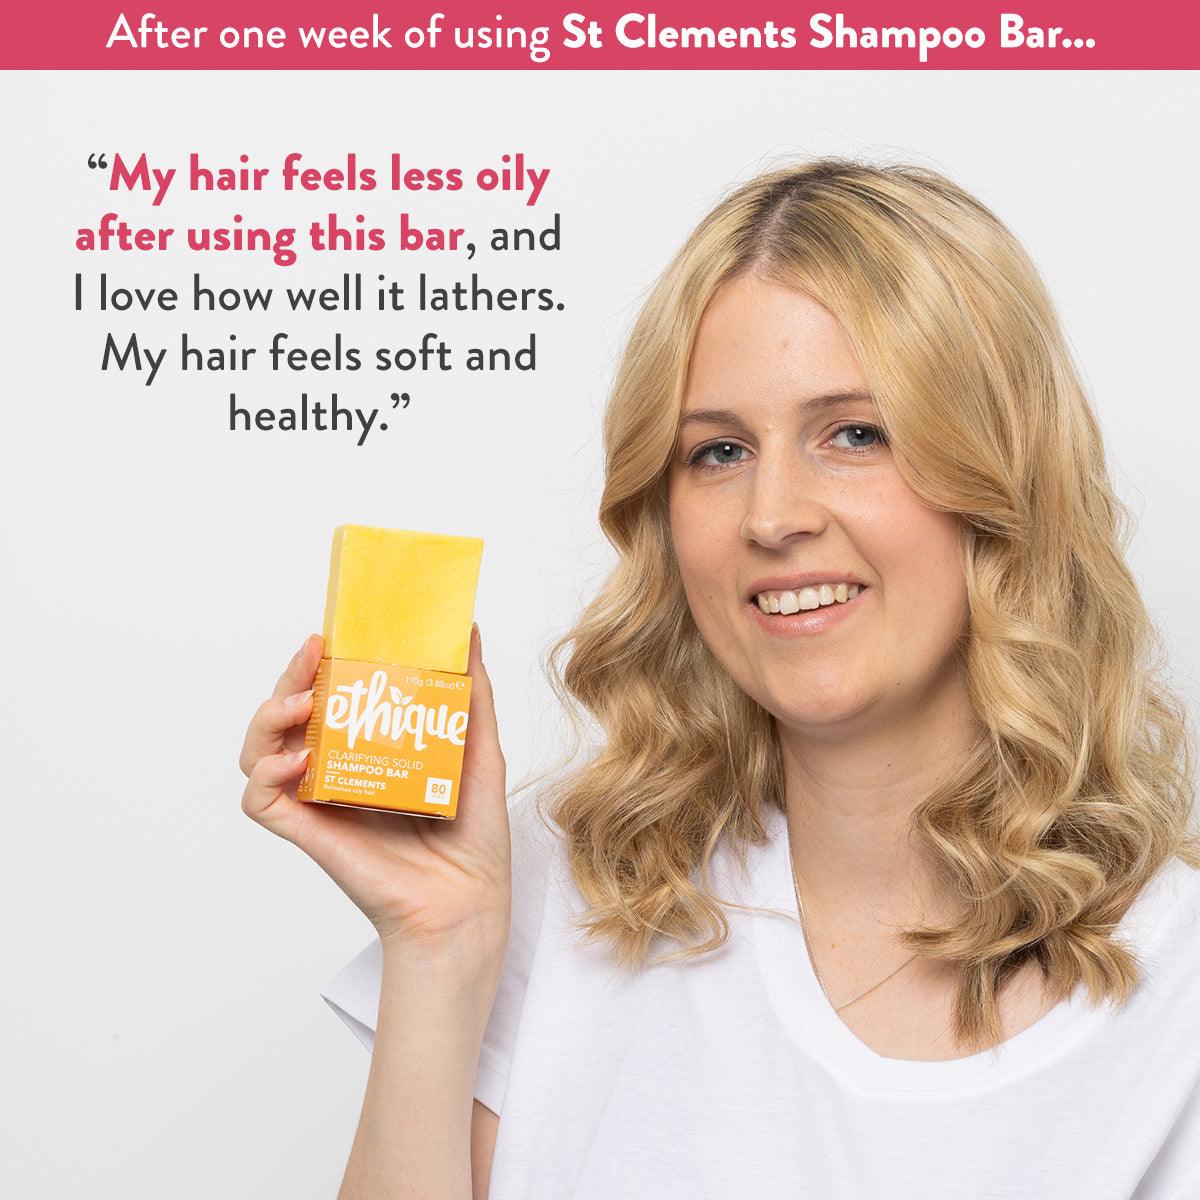 Clarifying Shampoo Bar for Oily Scalp and Hair: St Clements™